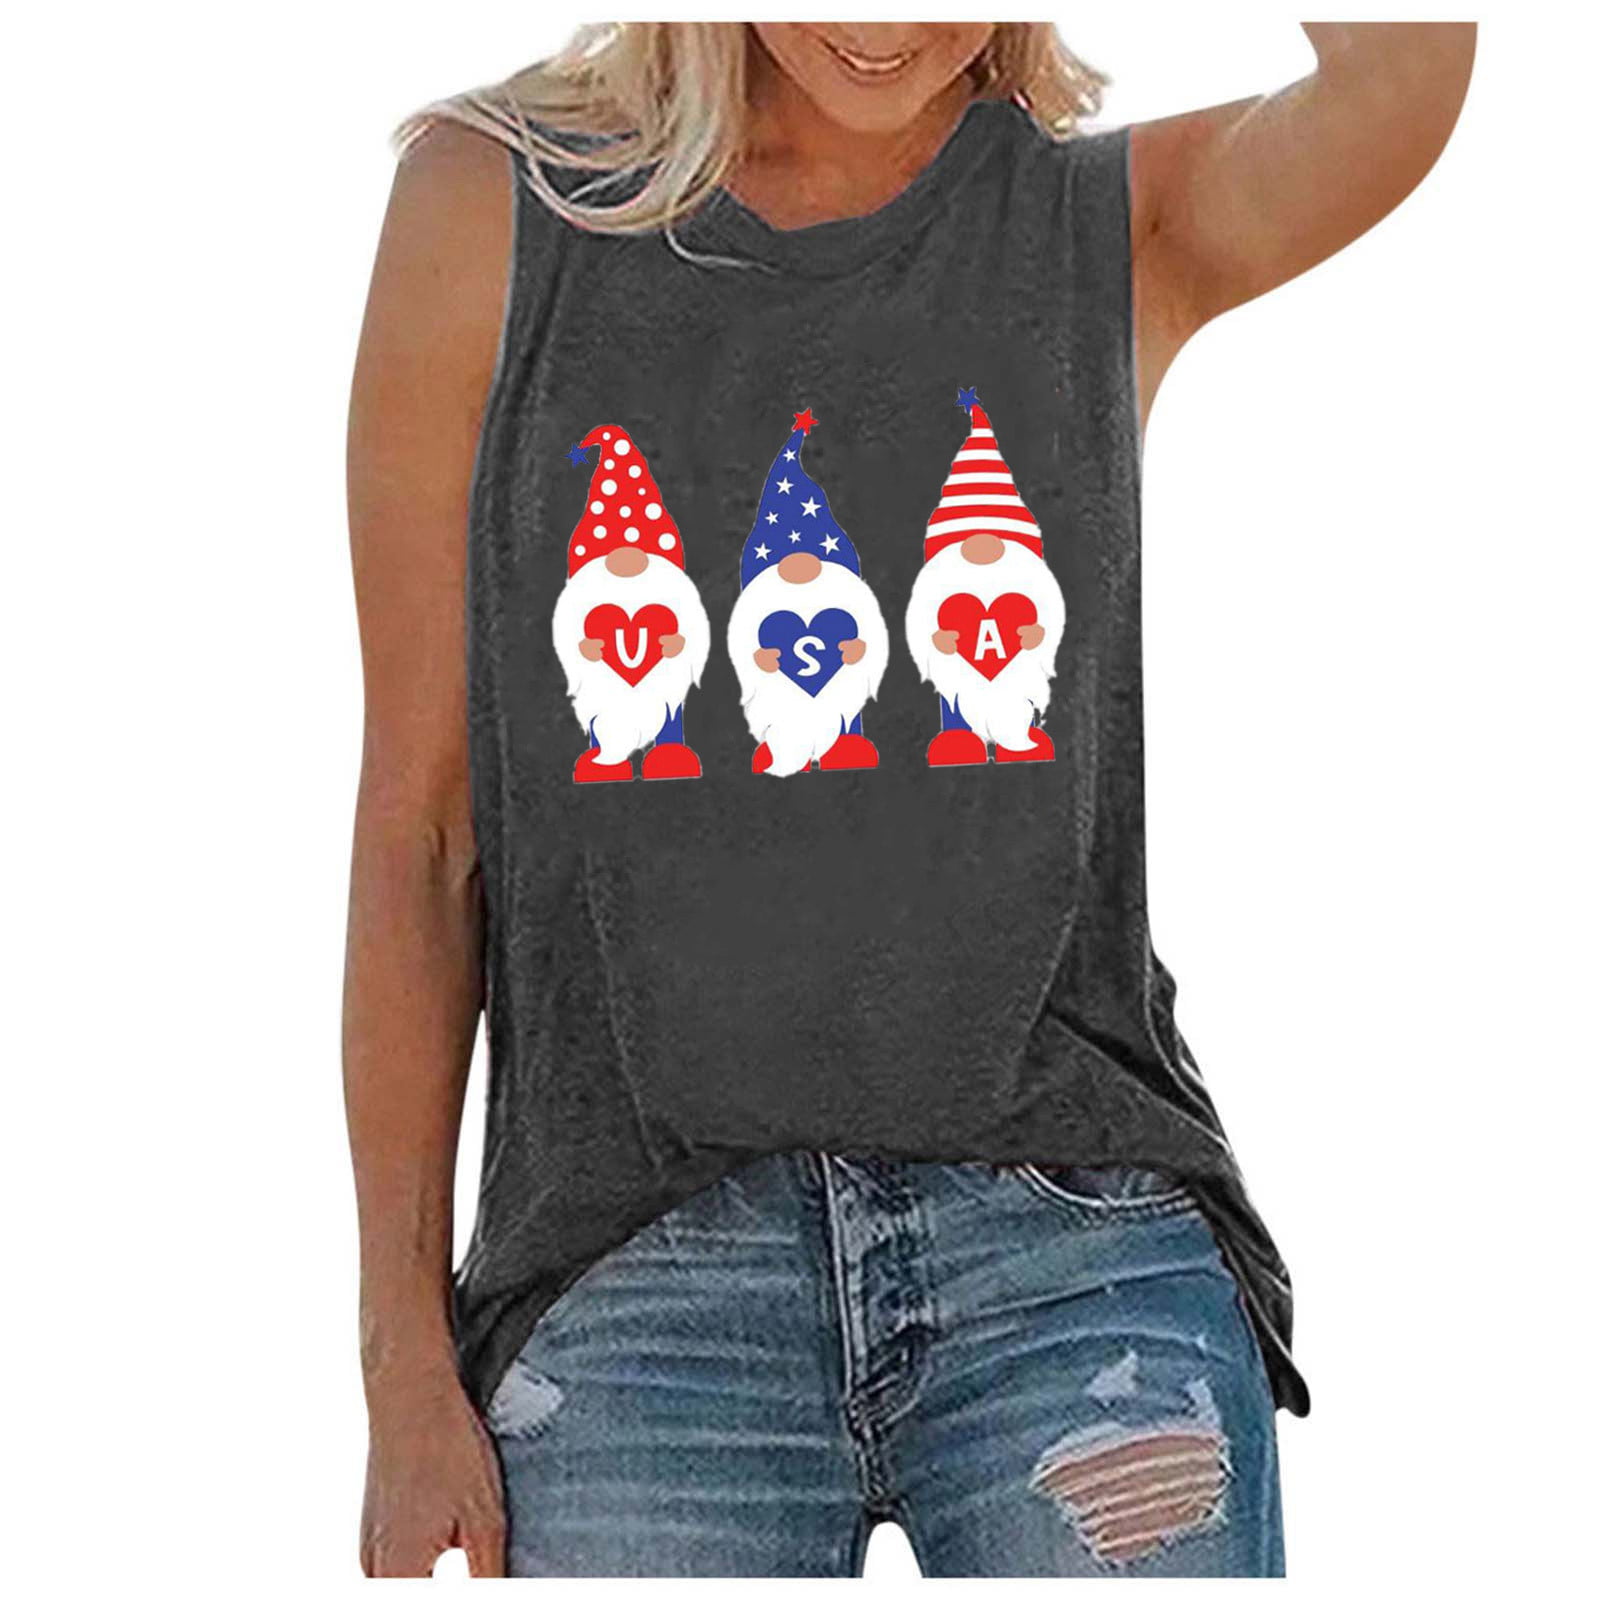 Independence Day 4th of July flag -Unisex Tank Top Patriotic Vaccinated wblue box